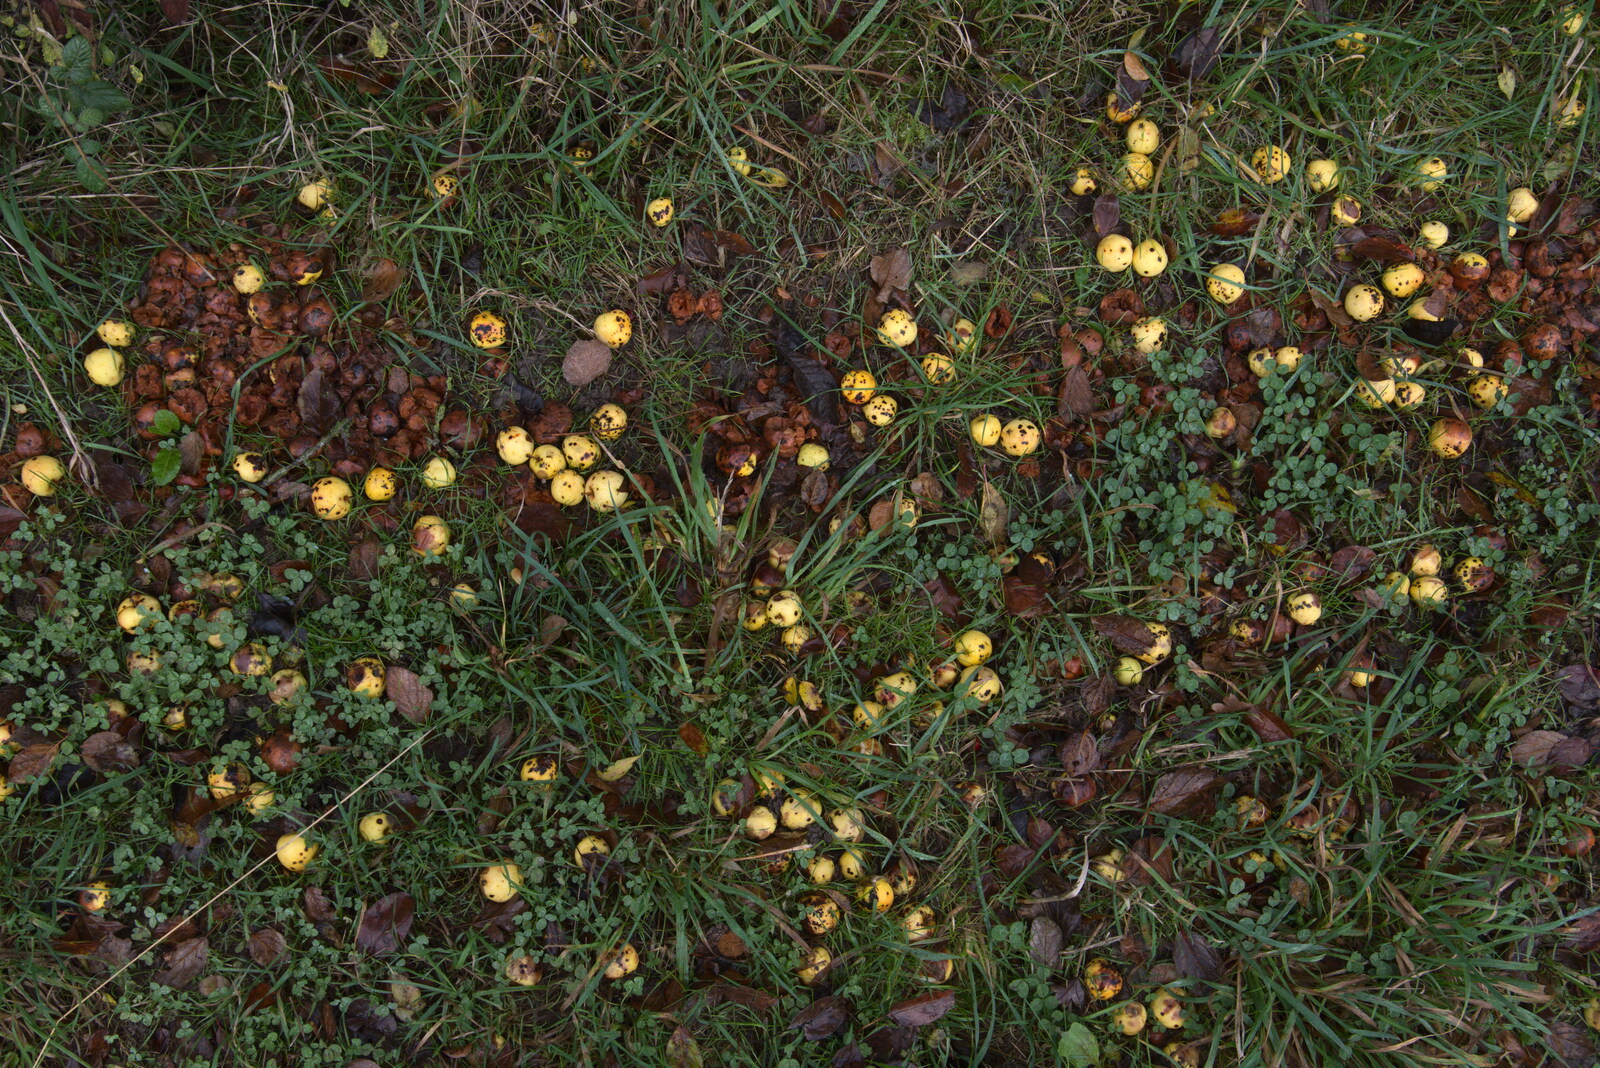 Funky yellow mushrooms from To See the Hairy Pigs, Thrandeston, Suffolk - 7th November 2020